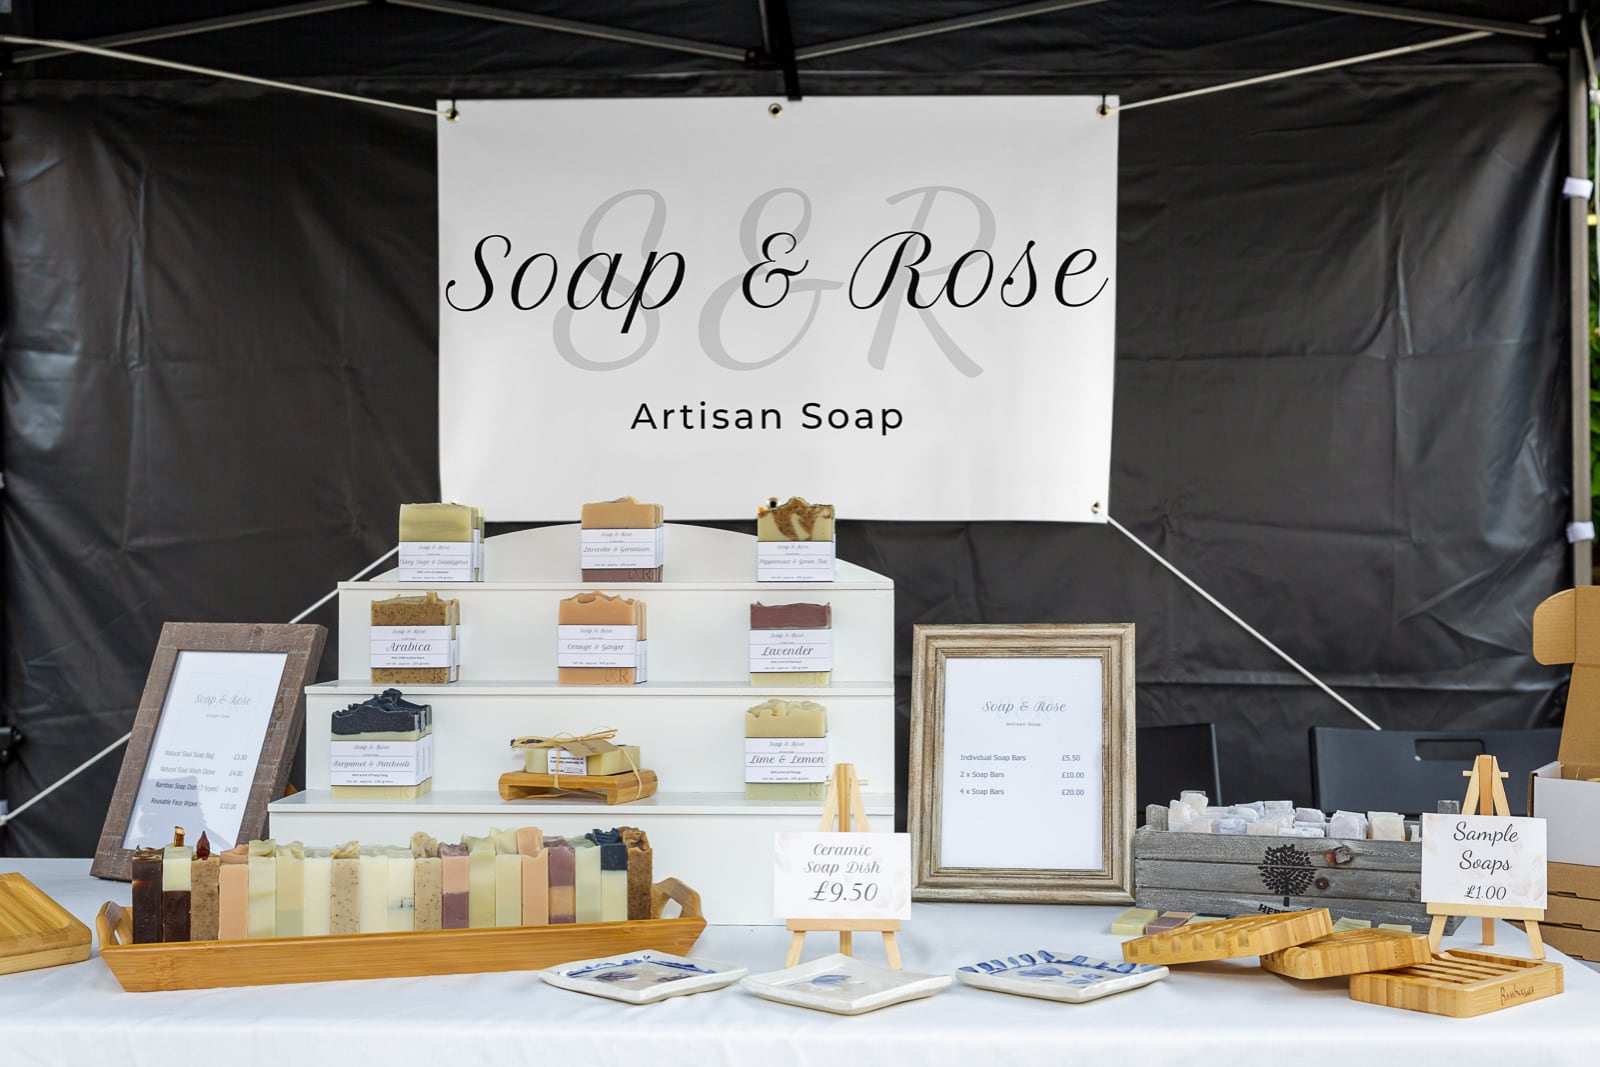 soap and rose products on display at local craft fair